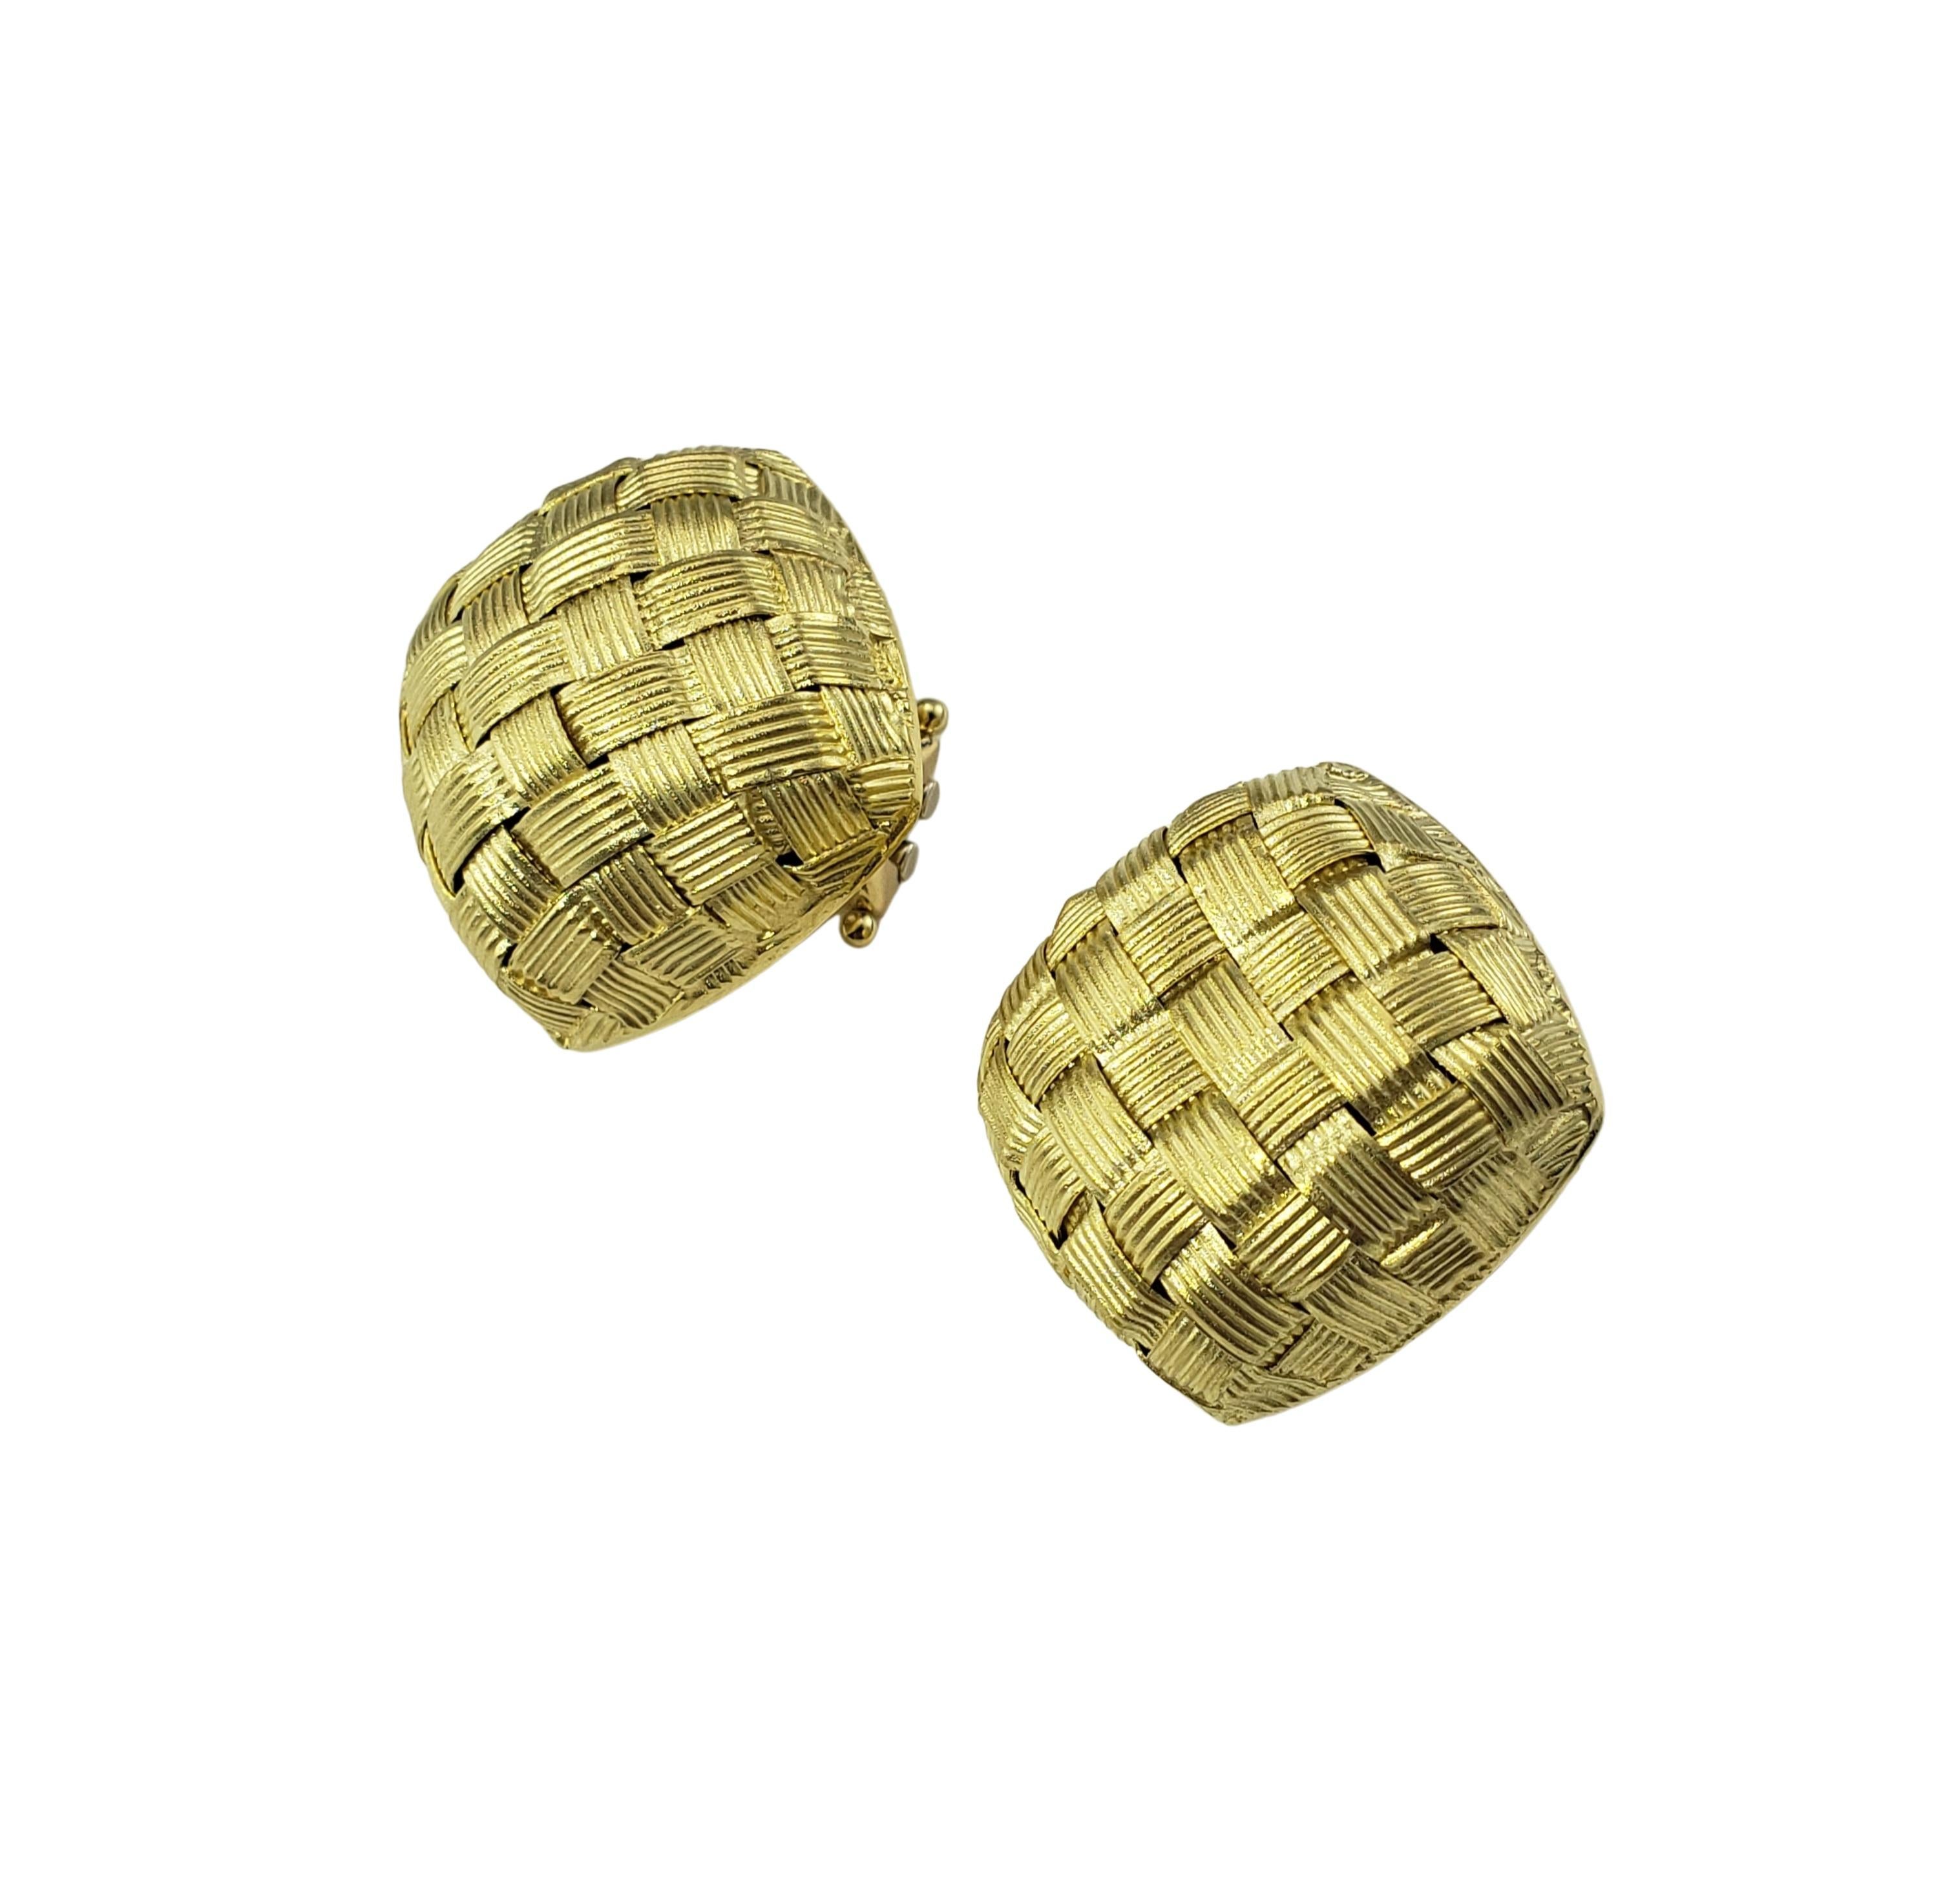 Roberto Coin 18 Karat Yellow Gold Basket Weave Clip On Earrings-

These elegant Robert Coin clip on earrings features a basket weave design crafted in beautifully detailed 18K yellow gold.

Size:  17 mm x 17 mm

Weight:  7 dwt. /  10.9